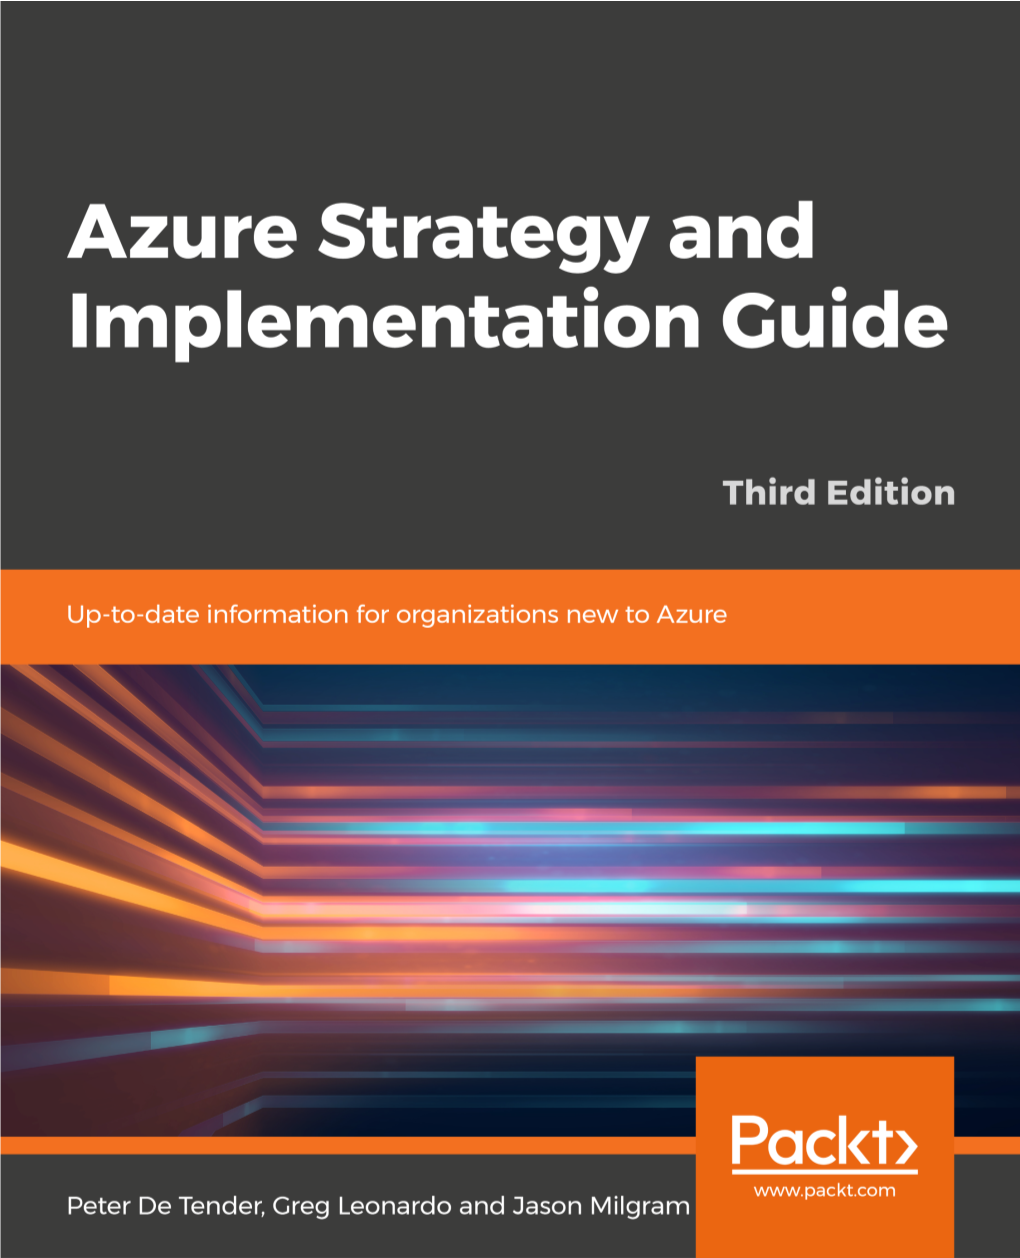 Azure Strategy and Implementation Guide Third Edition